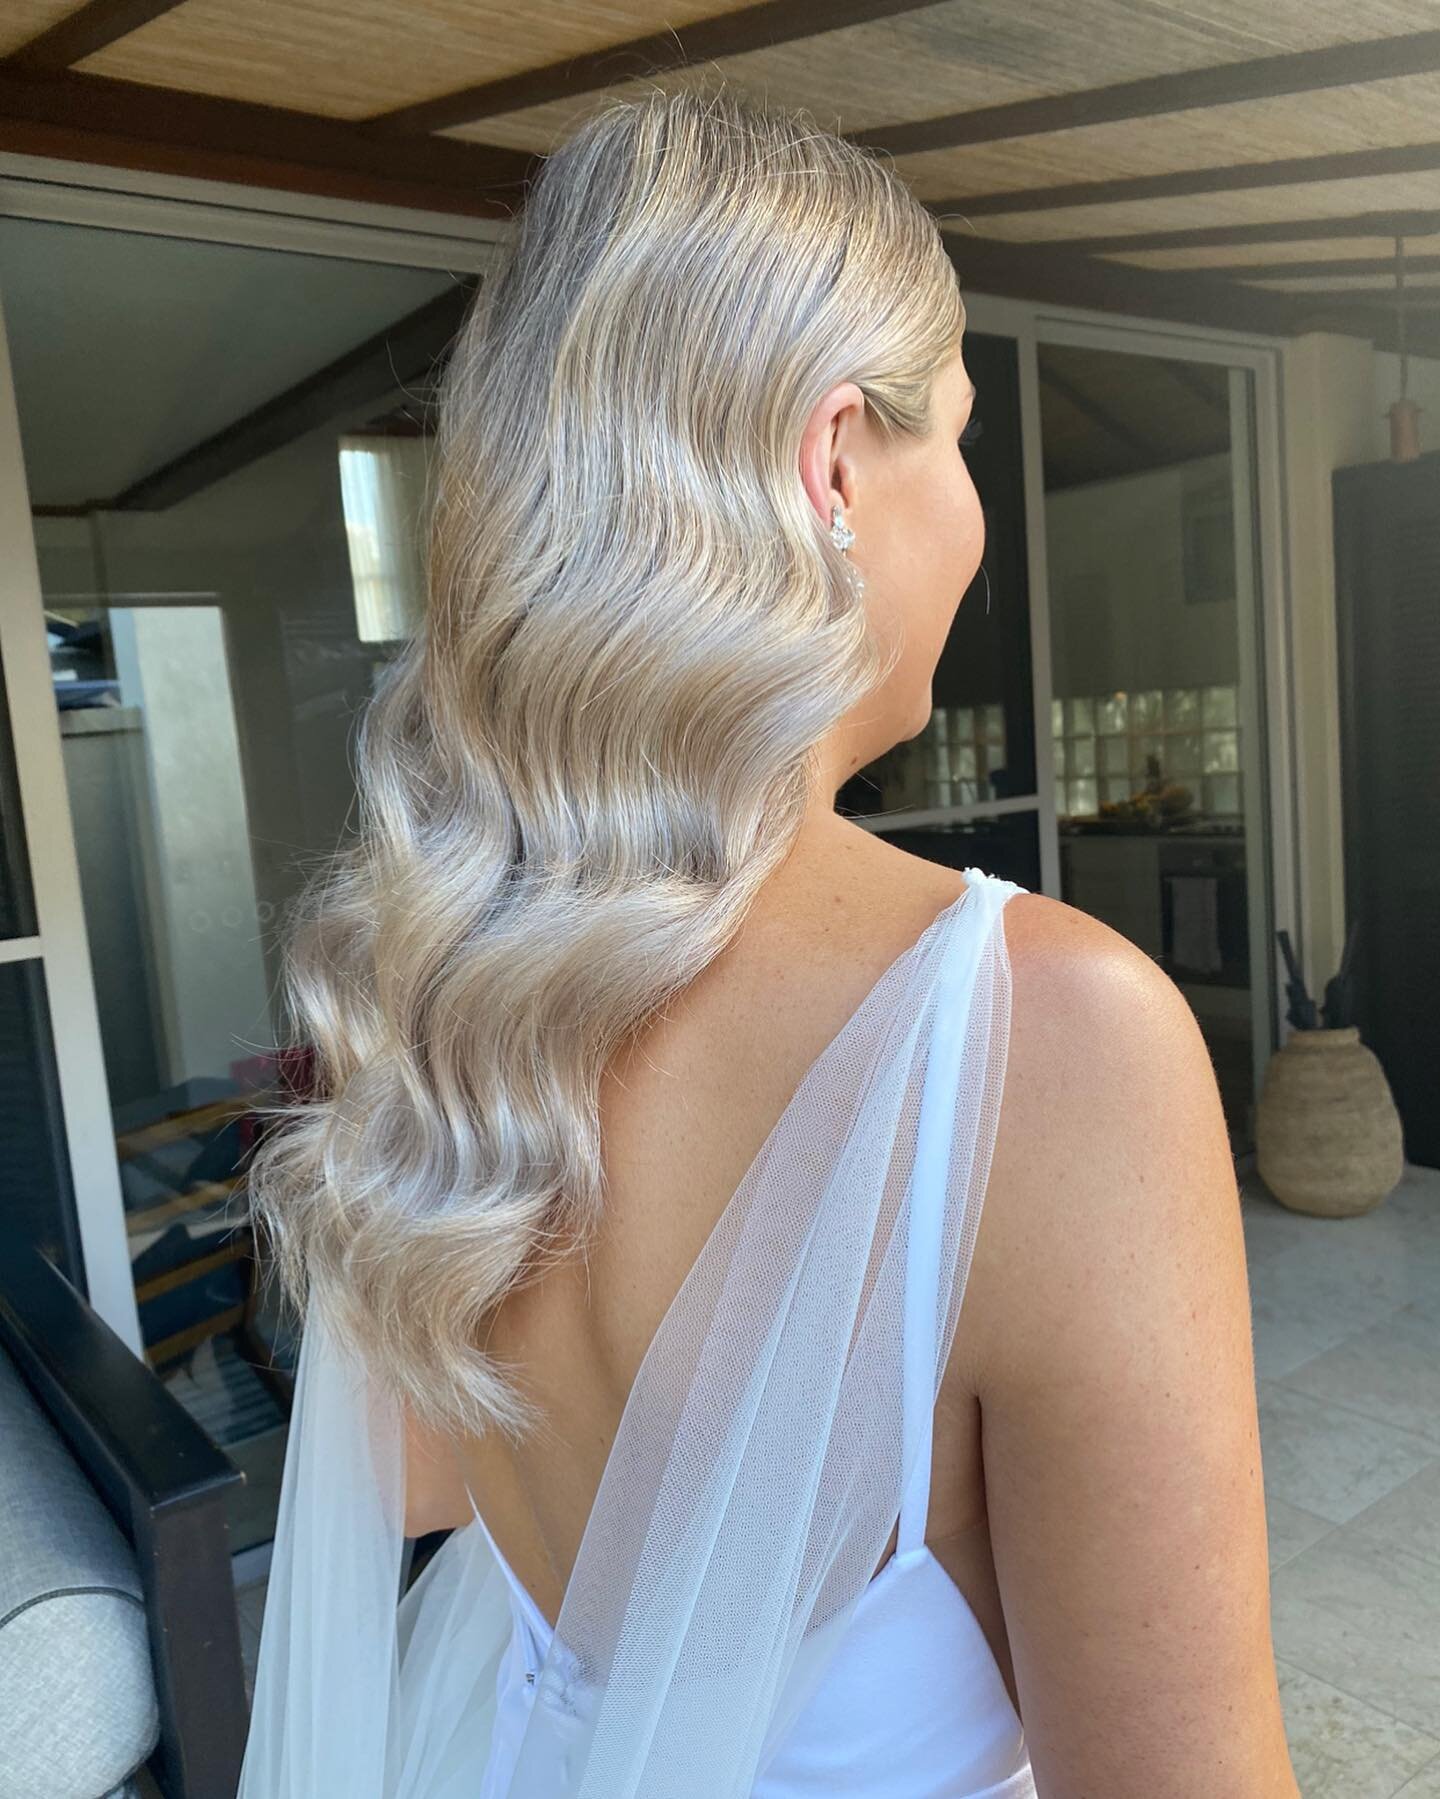 Still obsessing over this hair @lleahhhh almost 2 years later! 💓

#bridalhairstylist #bridalhairandmakeup #bridalhairinspo #bridebeauty #brushedoutcurls #burleighheads